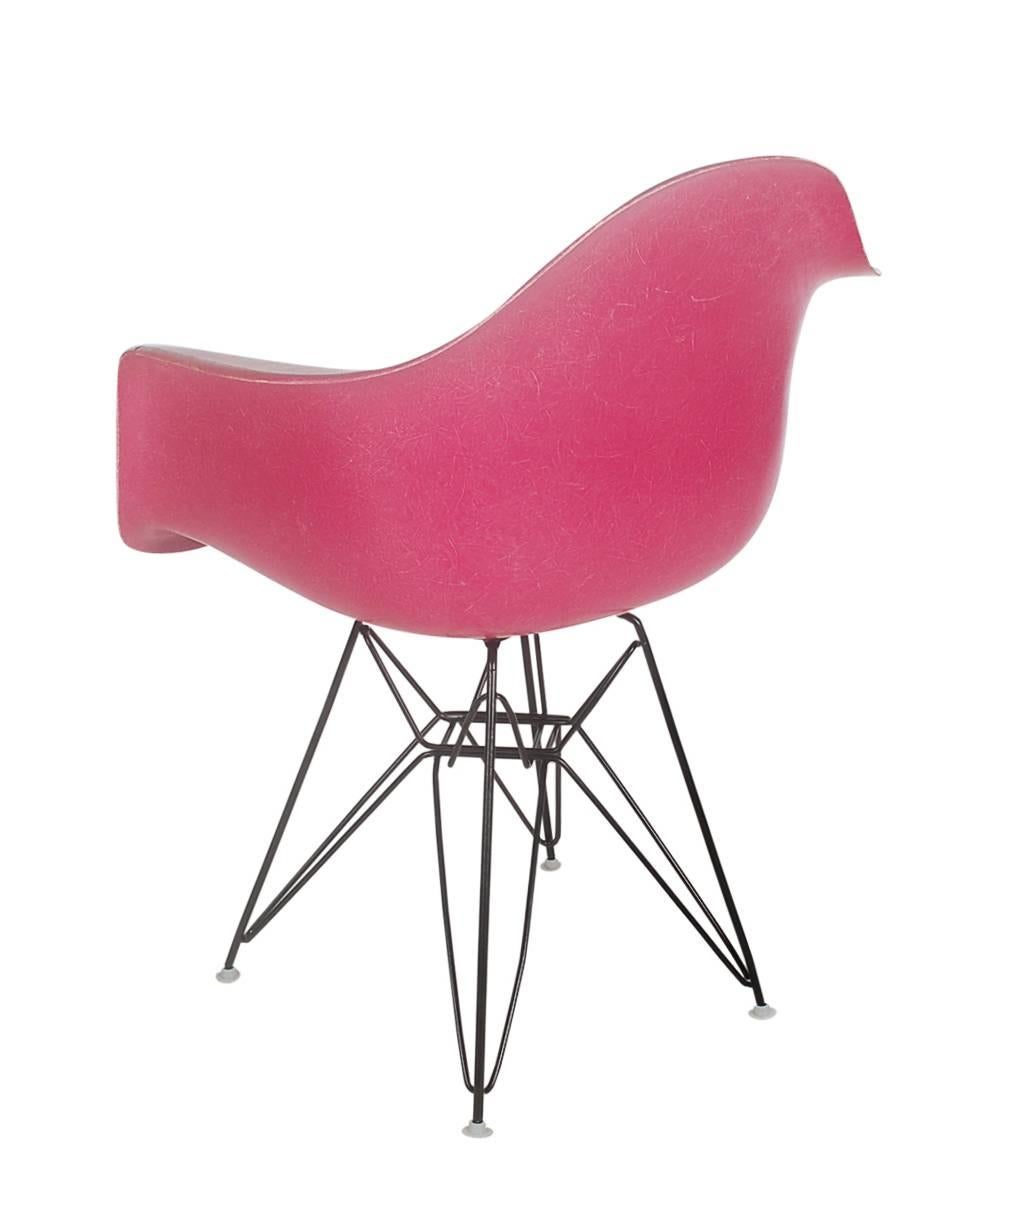 Mid-Century Modern Rare Set of Four Hot Pink Fiberglass Chairs by Charles Eames for Herman Miller